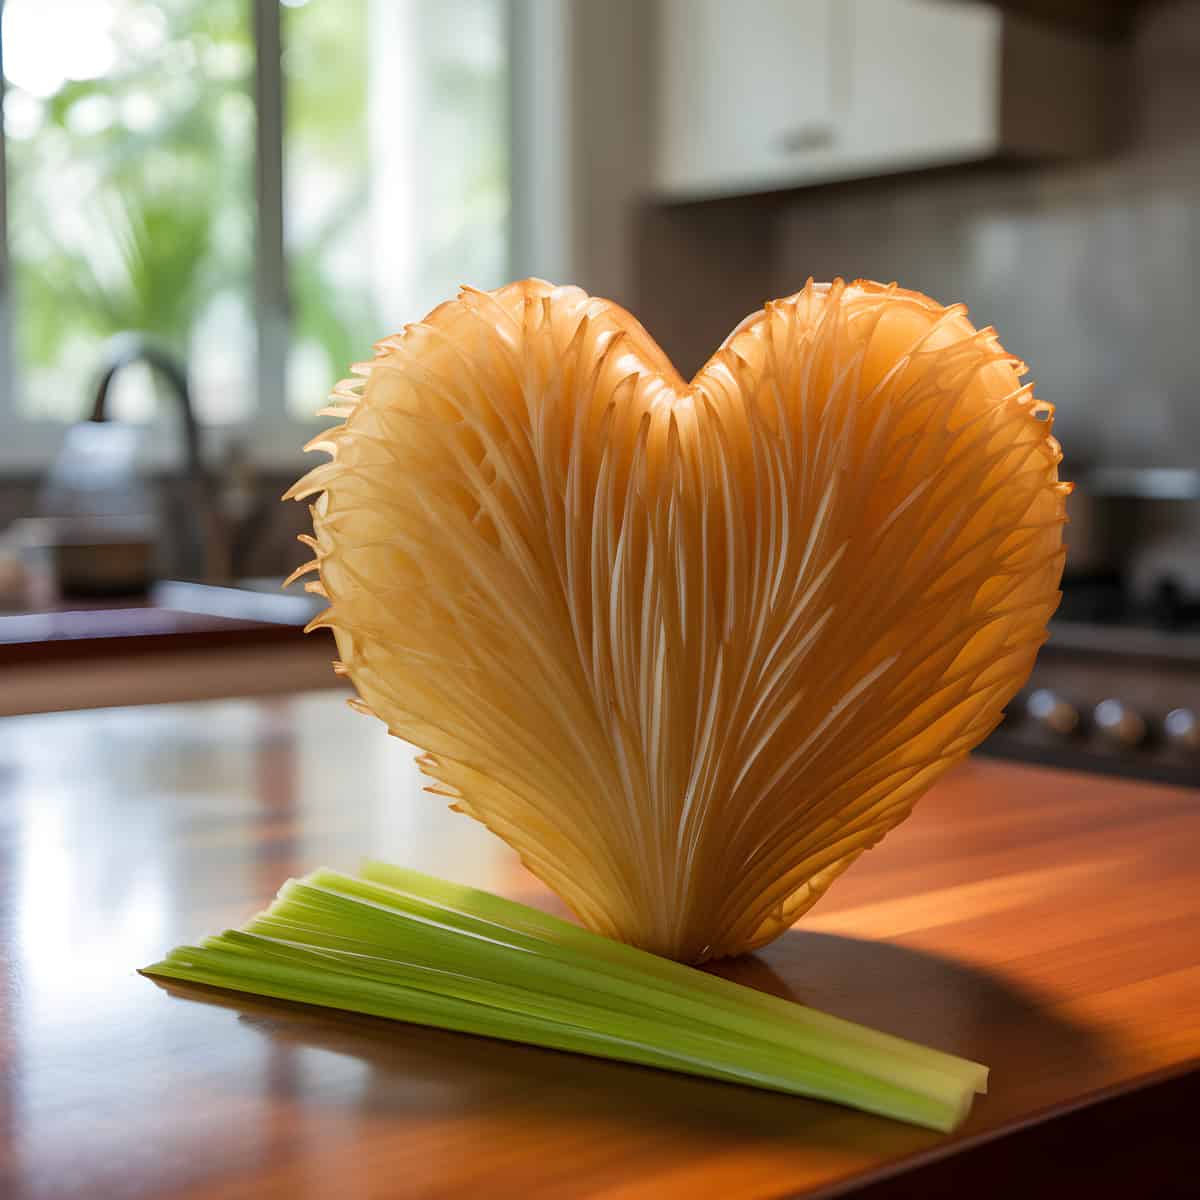 Heart Of Palm on a kitchen counter